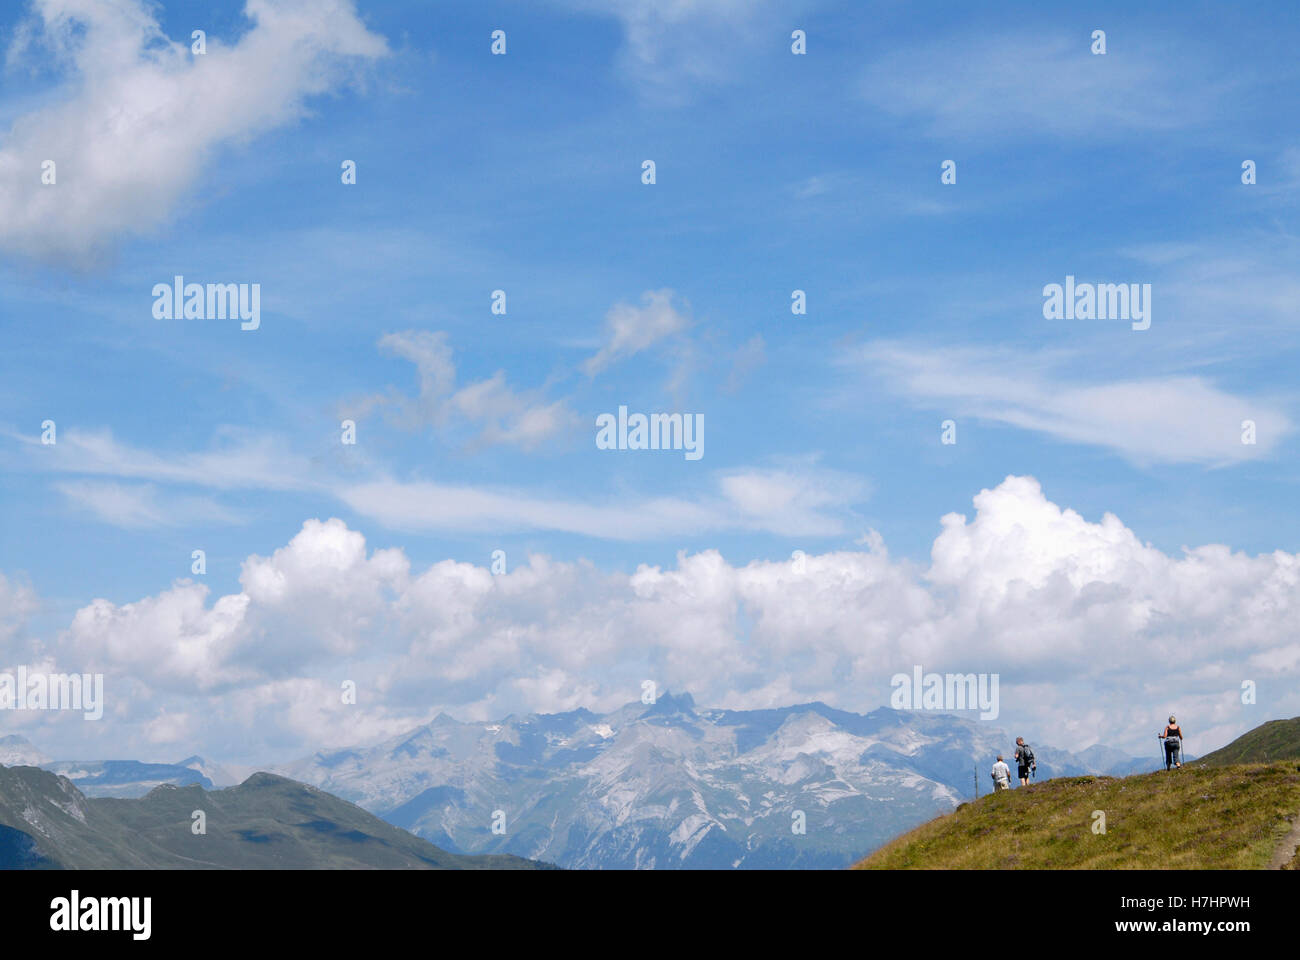 Hikers on Glaser Grat ridge in the canton of Grisons, Switzerland, Europe Stock Photo